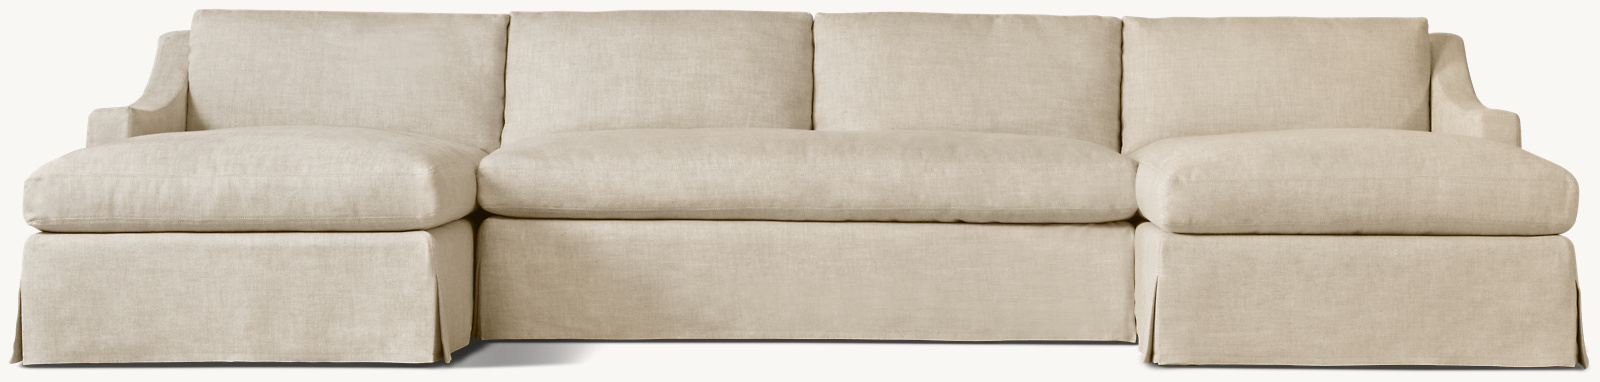 Shown in Sand Belgian Linen; sectional consists of 1 left-arm chaise, 1 armless sofa and 1 right-arm chaise. Cushion configuration may vary by component.